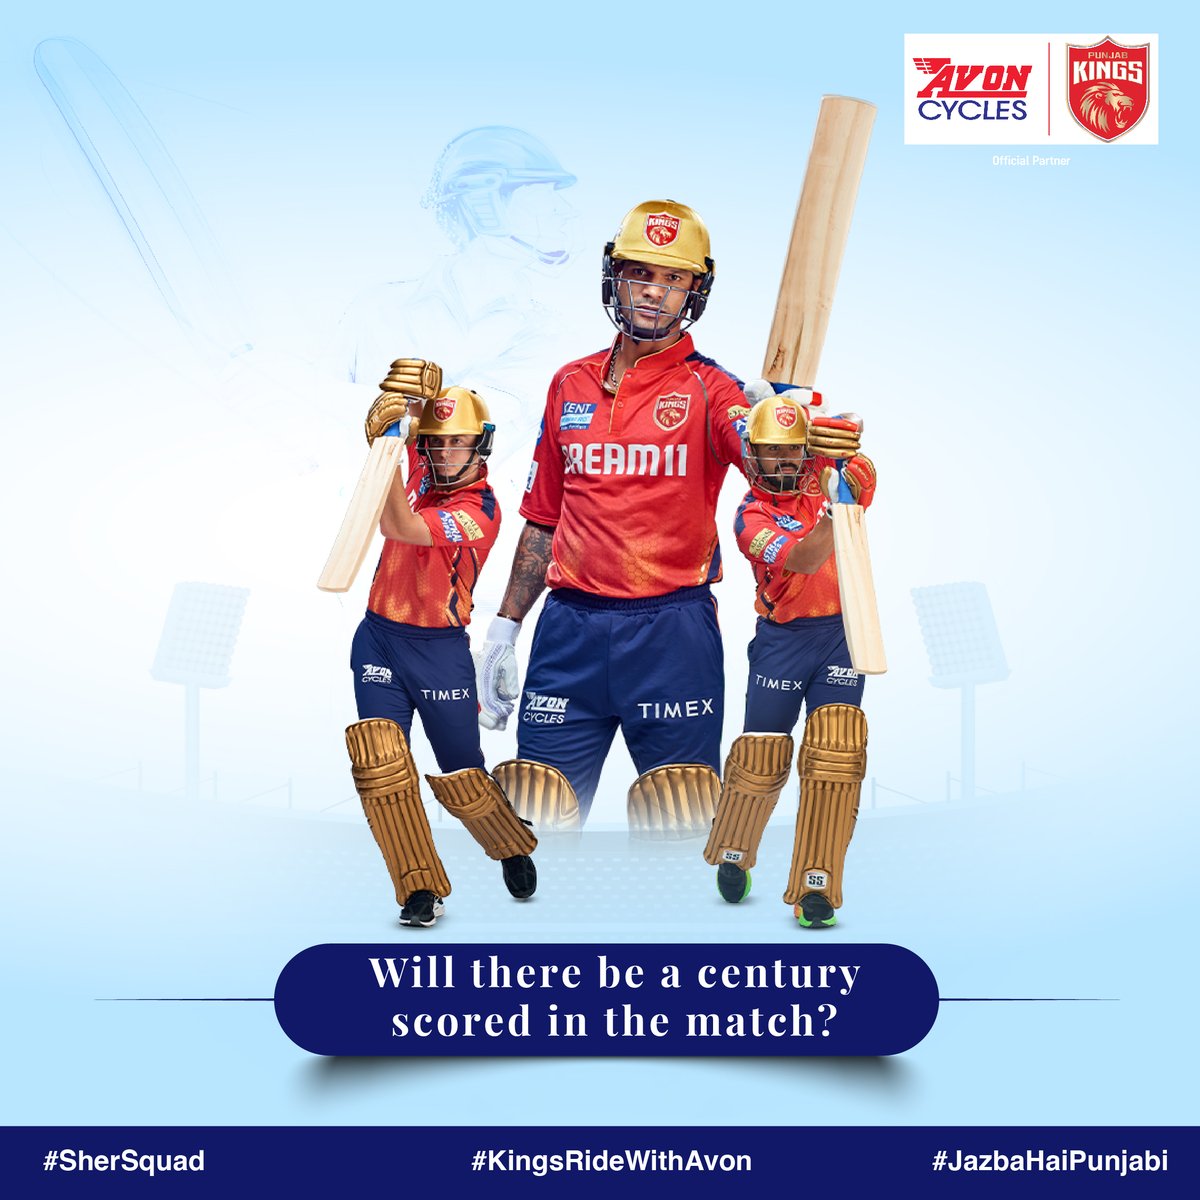 Share your guesses in the comments below for a chance to win exciting surprises 😍 #Avon #AvonCycles #KingsRideWithAvon #kings11punjab #SaddaPunjab #PBKS #T20Match #jazbahaipunjabi❣️💫